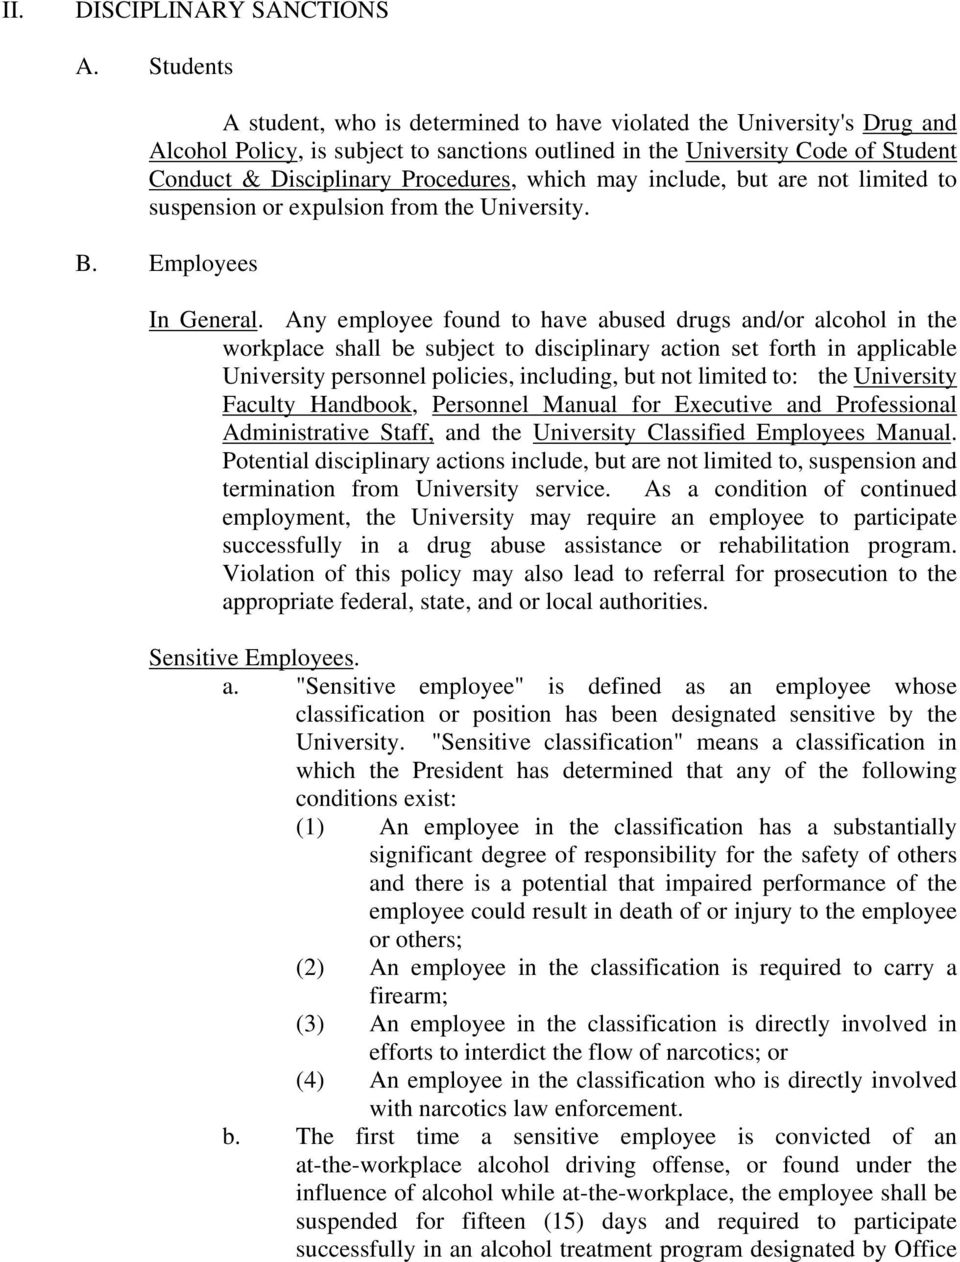 which may include, but are not limited to suspension or expulsion from the University. B. Employees In General.